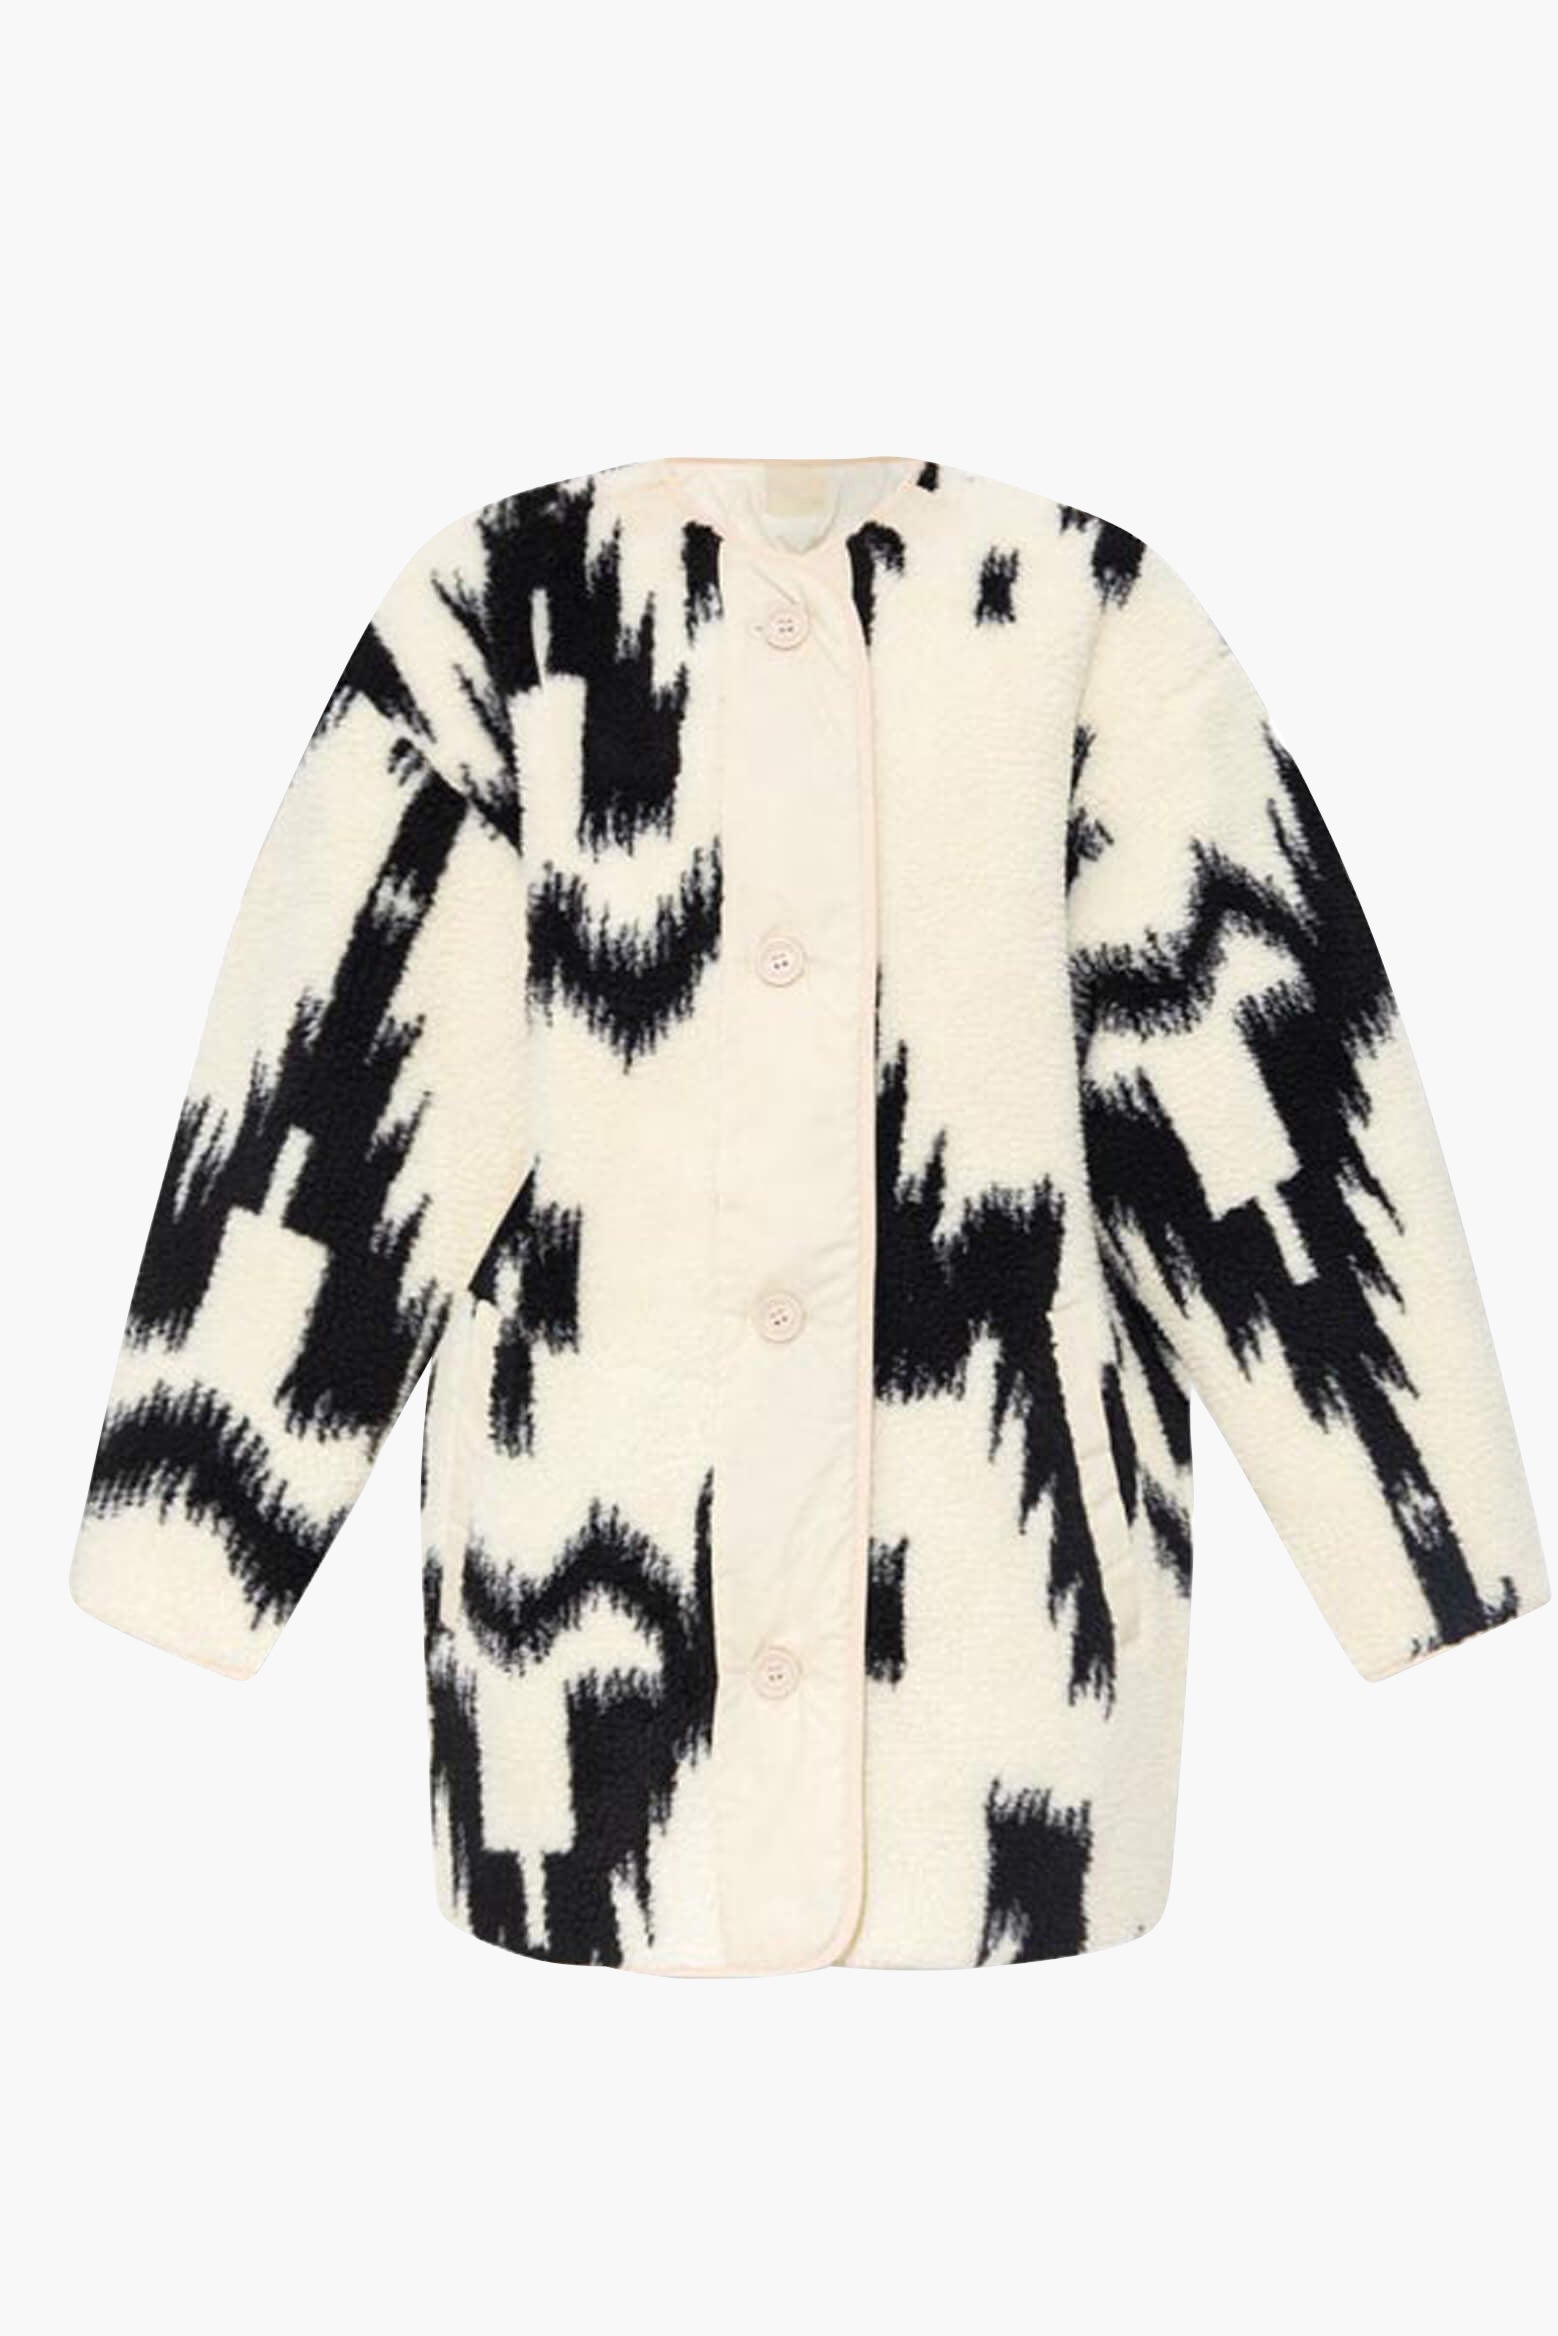 Isabel Marant Himemma Coat in Ecru and Black from The New Trend